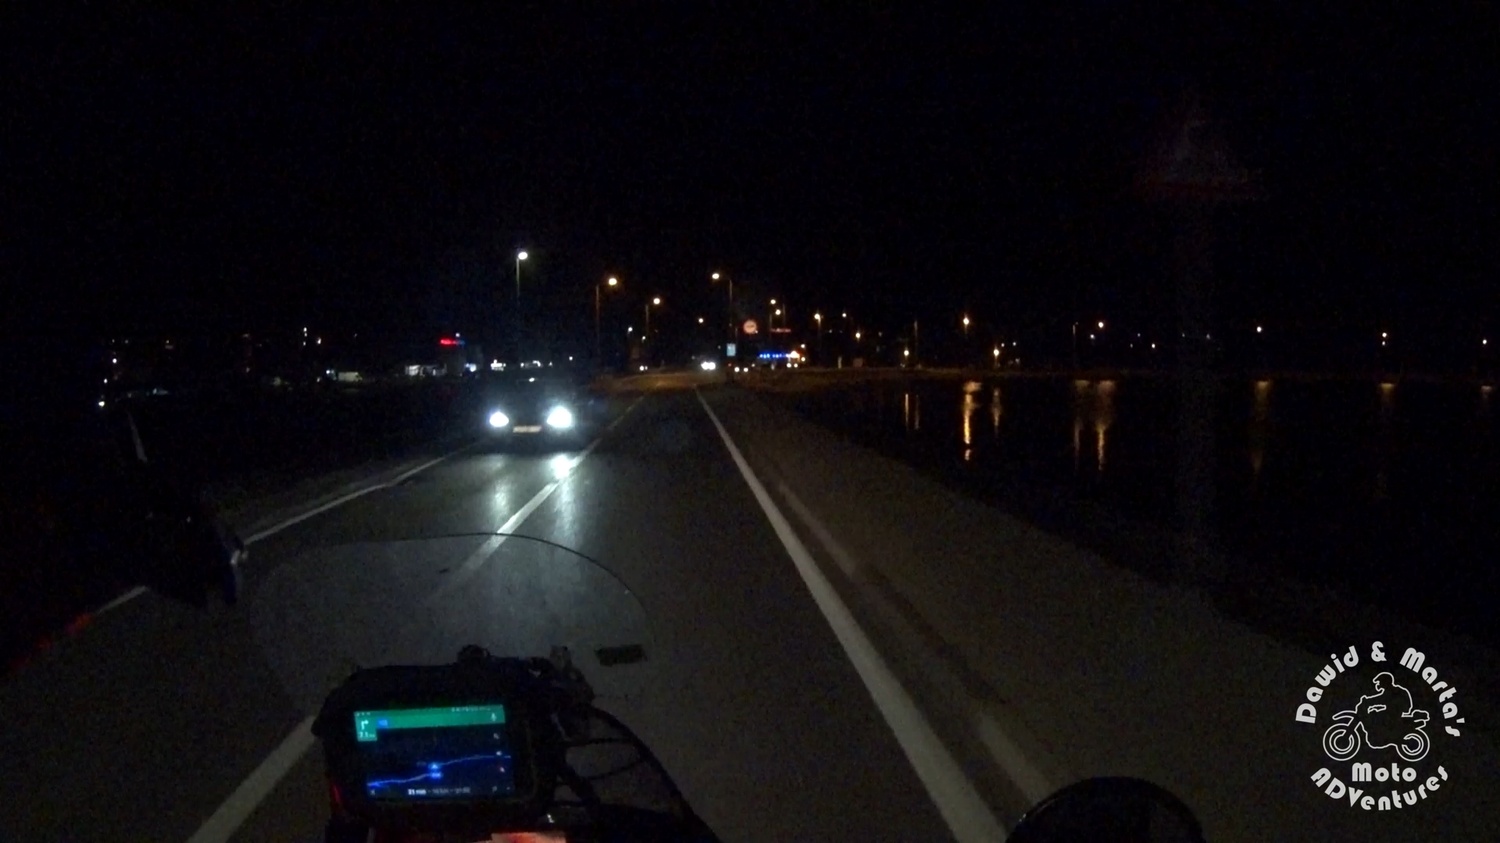 Riding the Pag Island by night